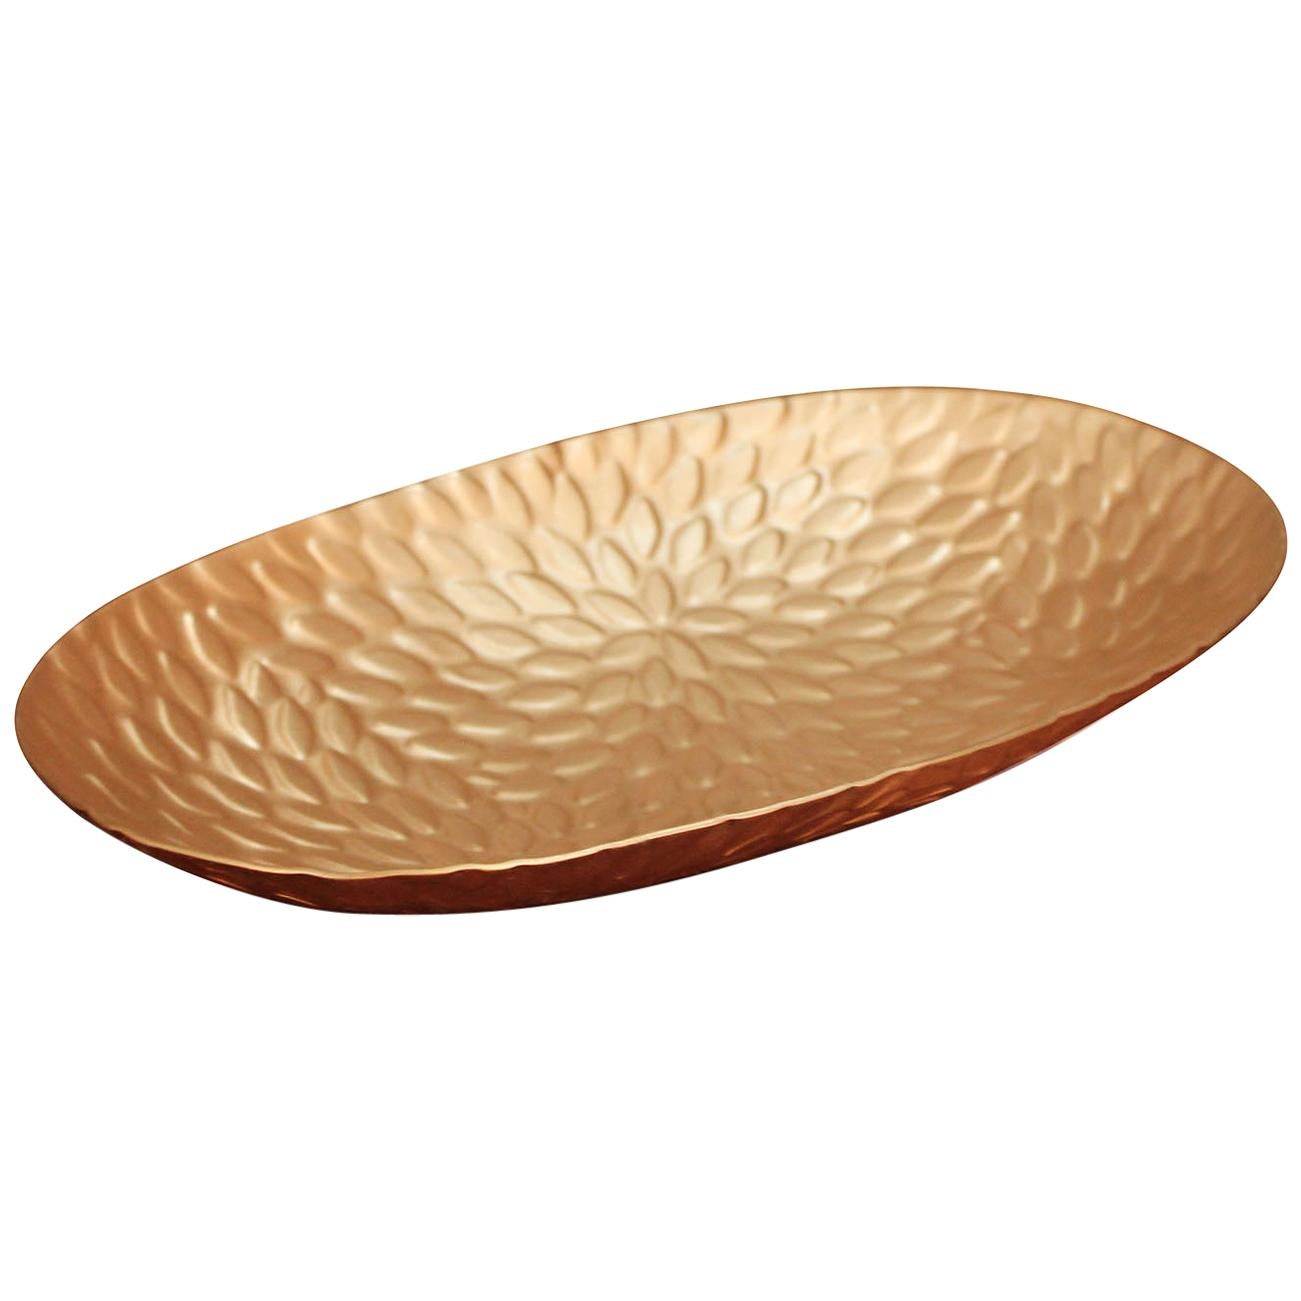 Mia Tray in Matte Copper by CuratedKravet